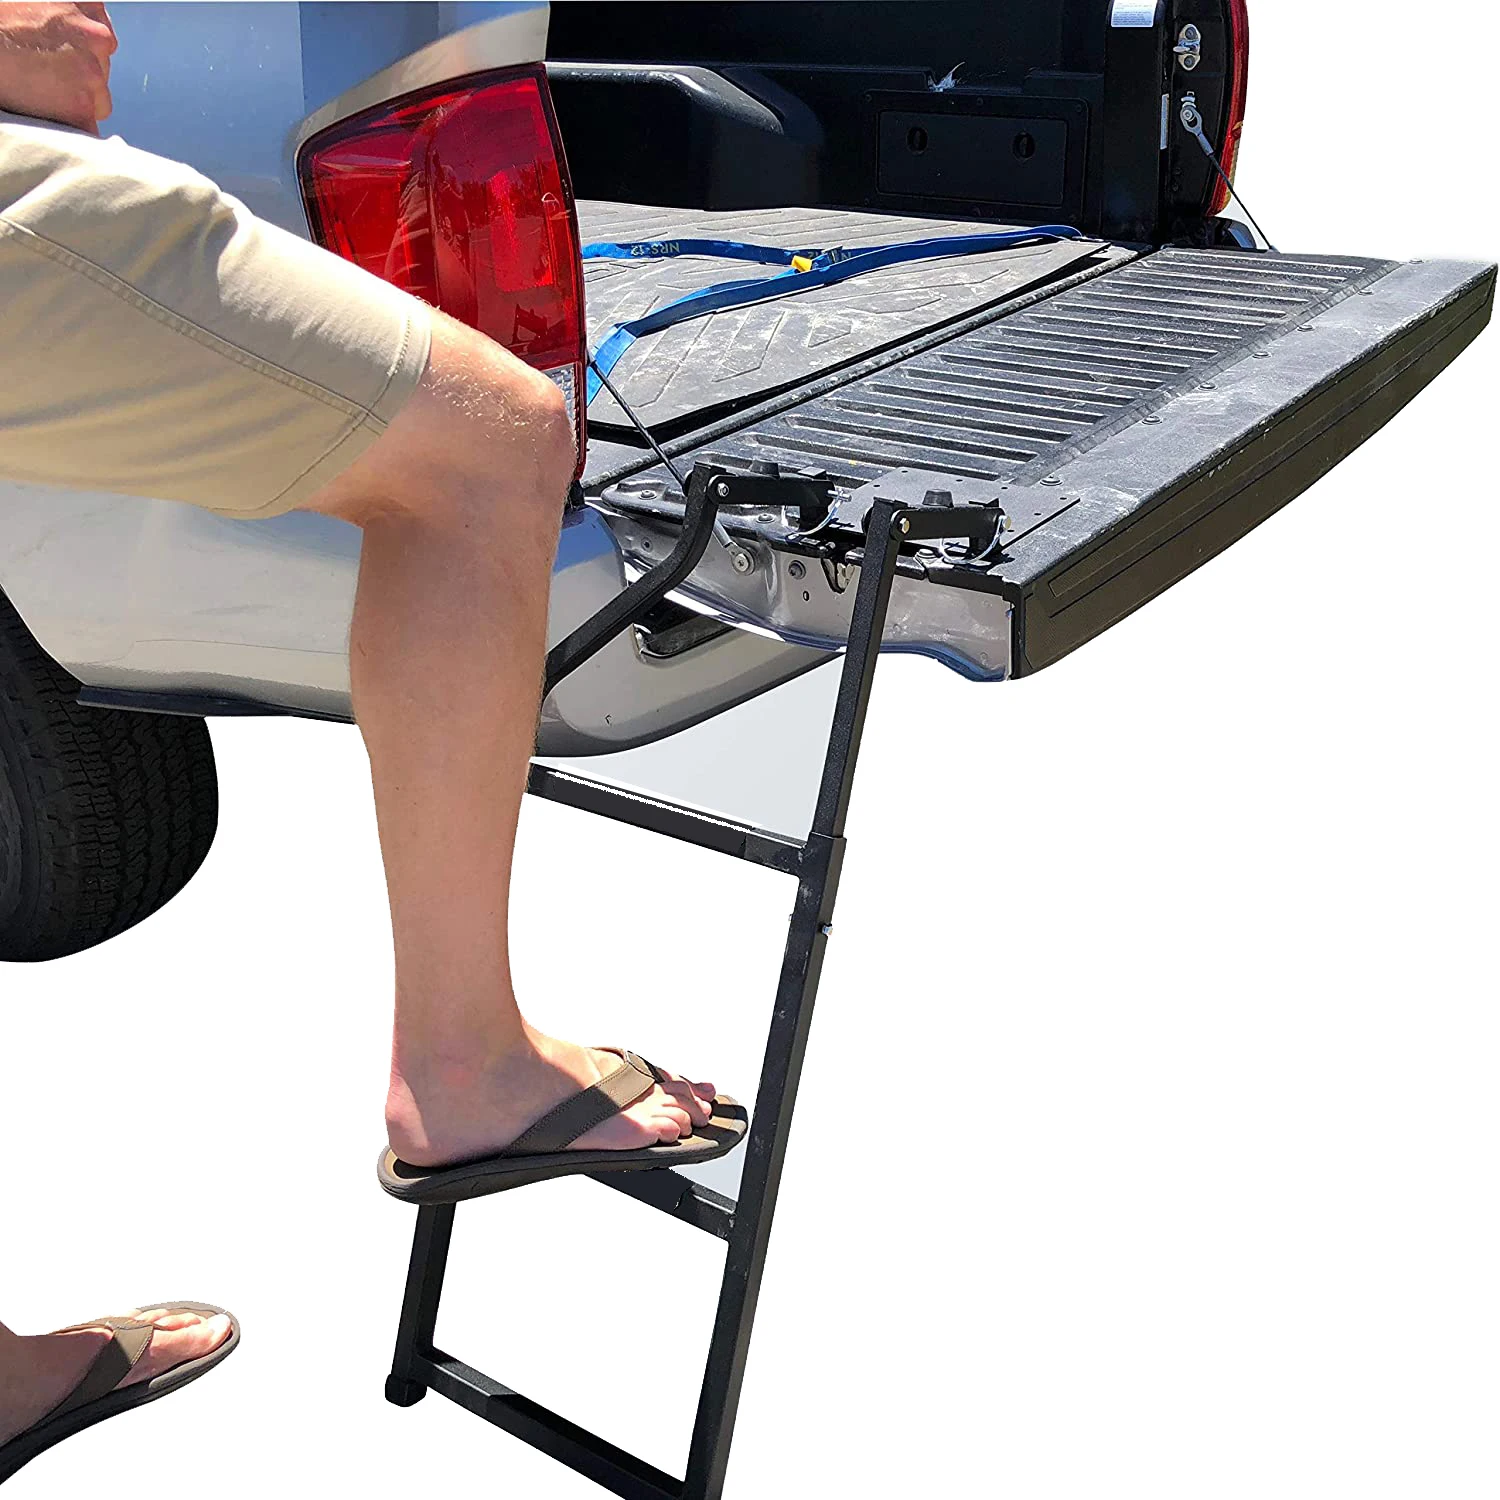 Universal Truck Tailgate Ladder Pickup Foldable Extension Step Ladder 87-107cm 4x4 Accessories universal truck tailgate ladder pickup foldable extension step ladder 87 107cm 4x4 accessories